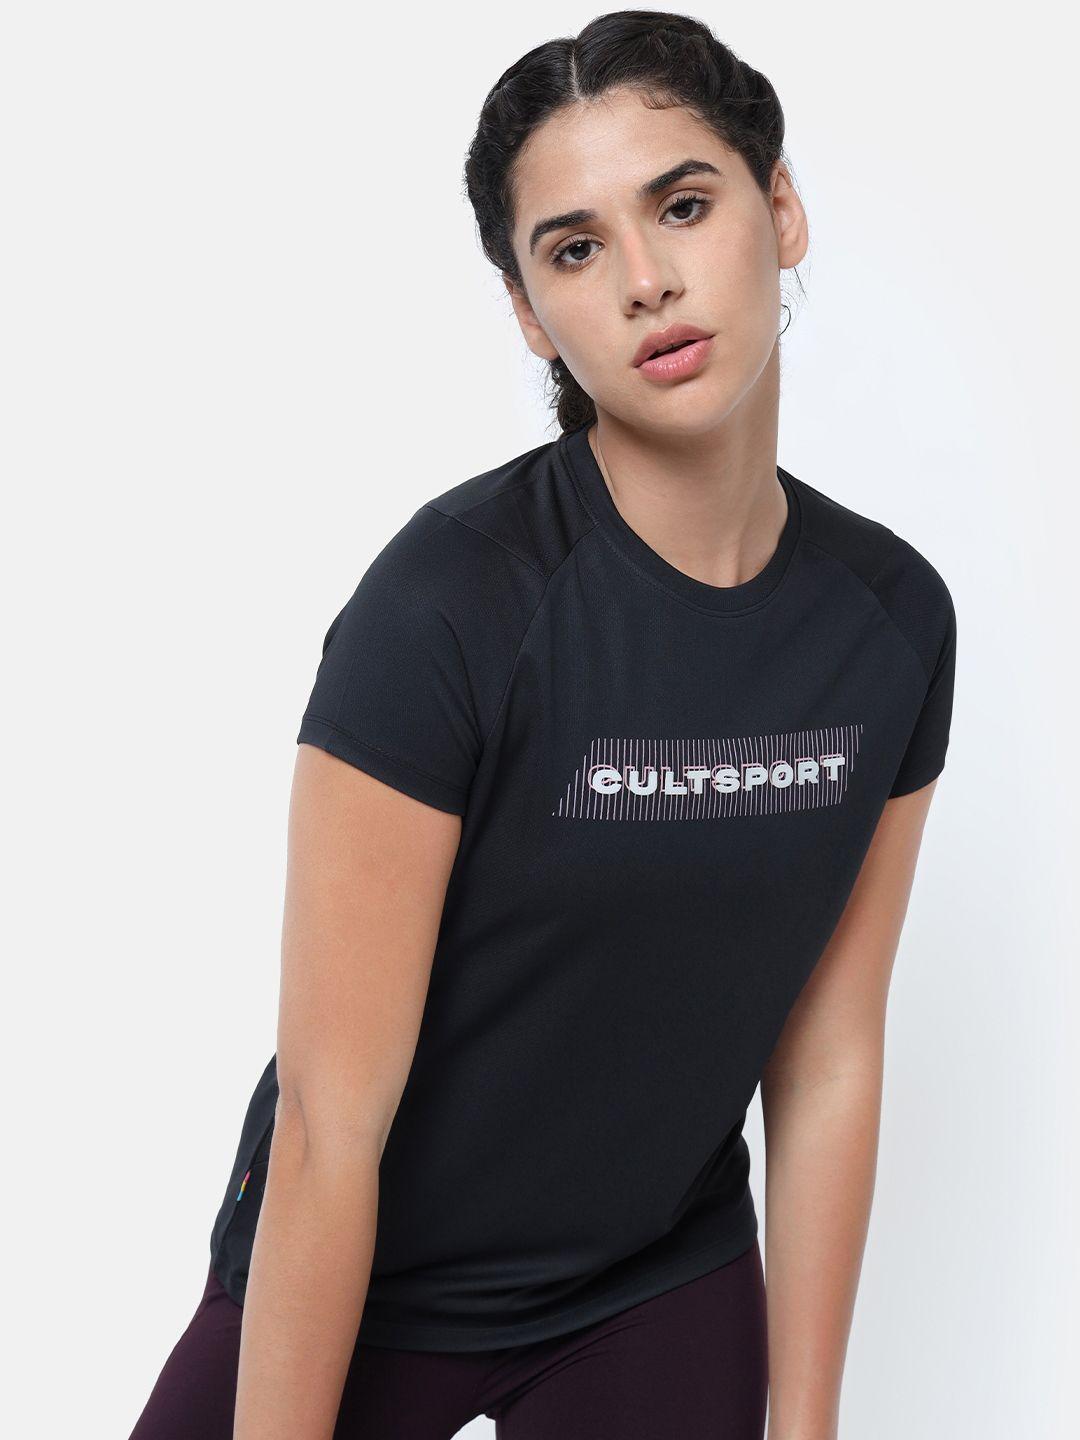 cultsport typographic printed moisture wicking sports t-shirt